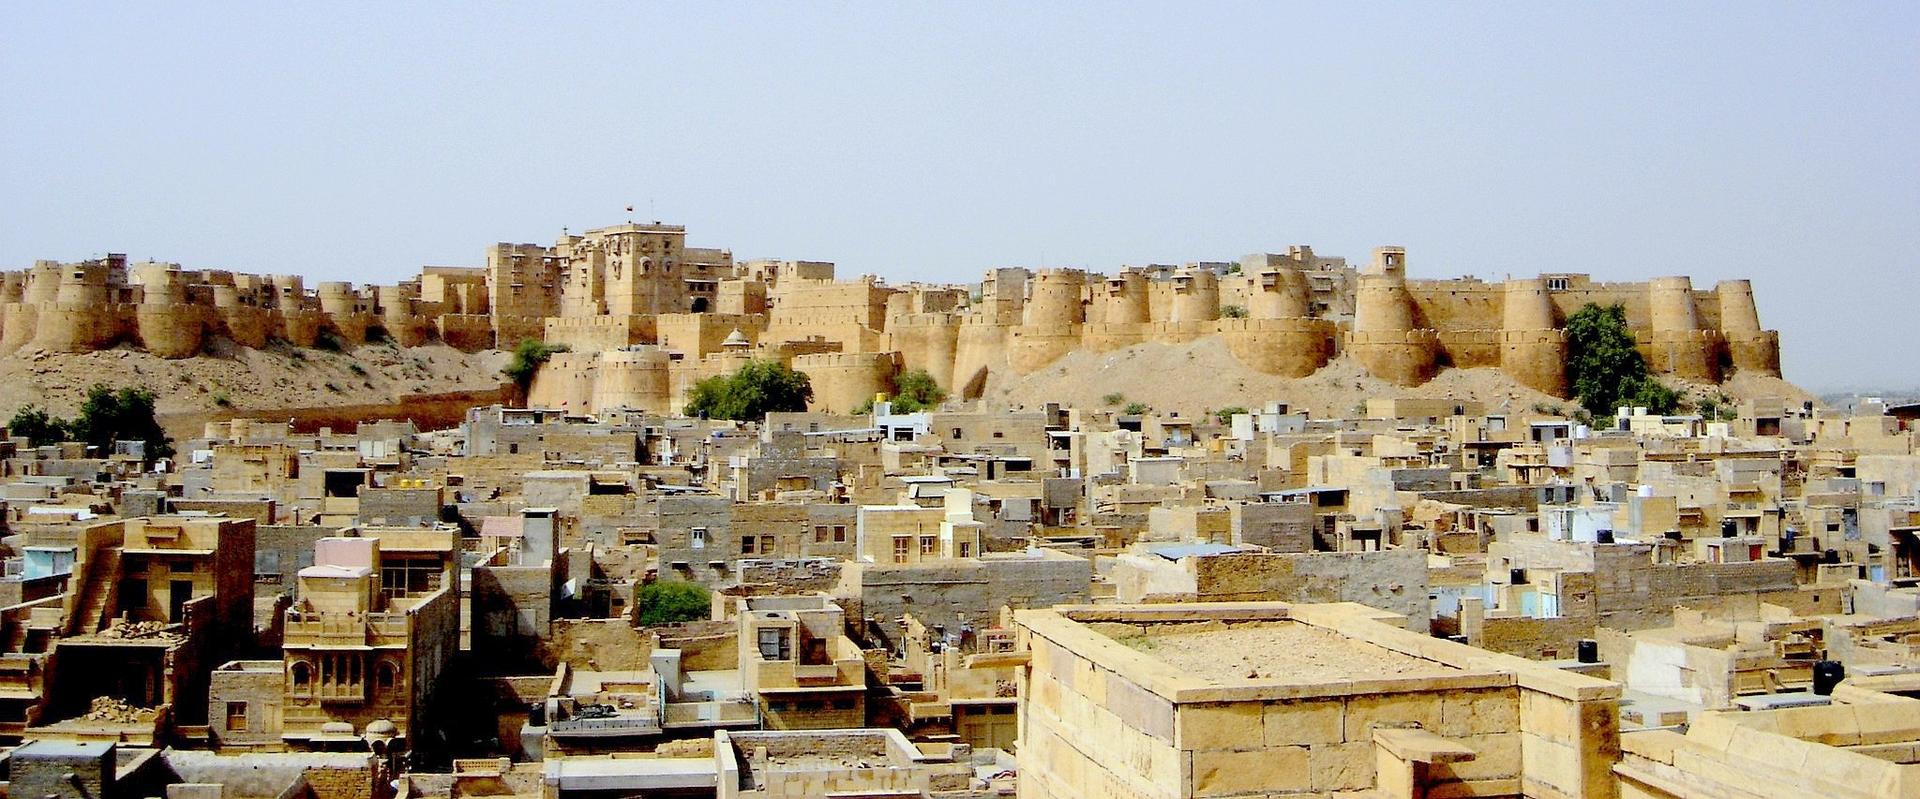 What To See In Jaisalmer